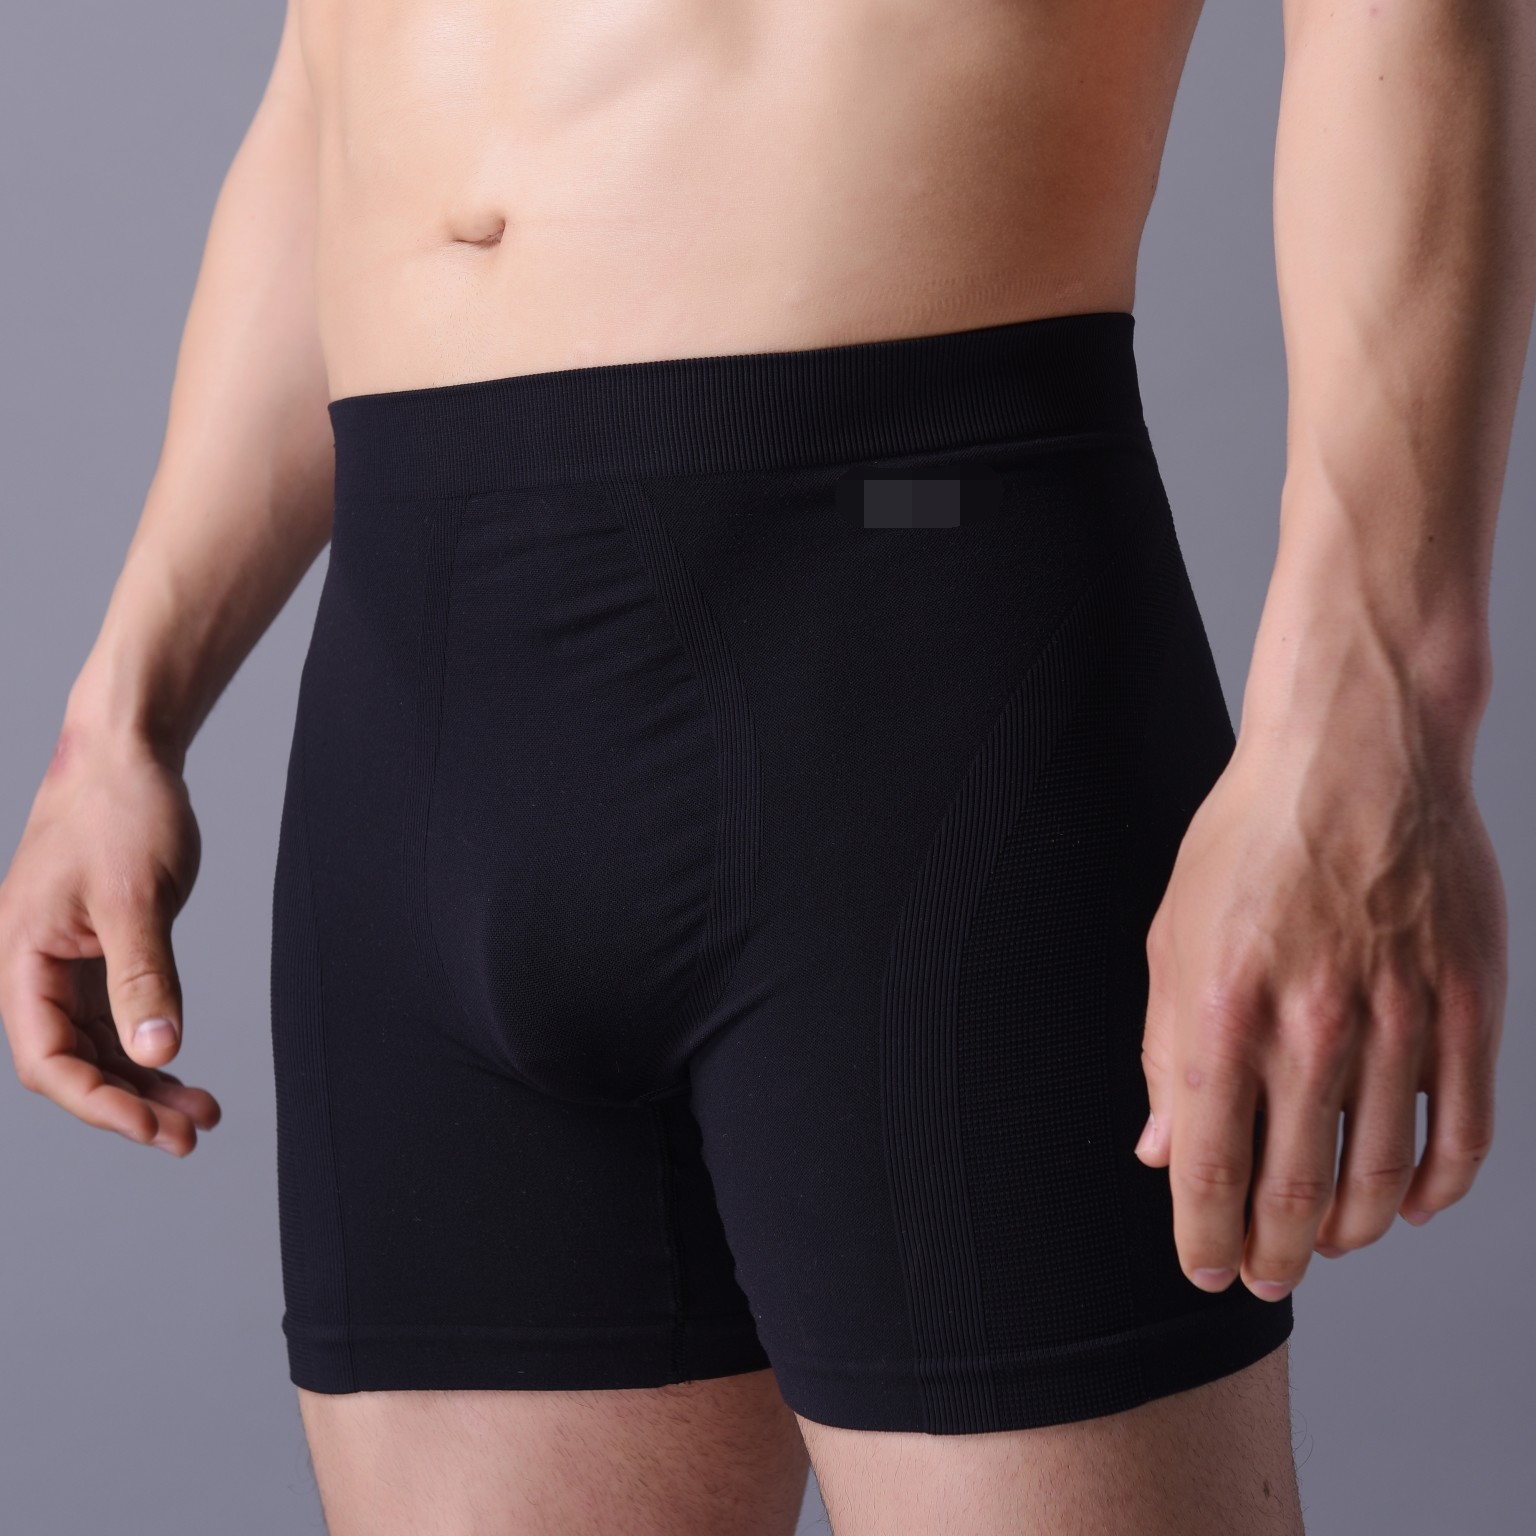 Wholesale Man seamless underwear, boy boxer,  popular  fitting design,   soft and plain weave.  XLS002, man shorts. from china suppliers